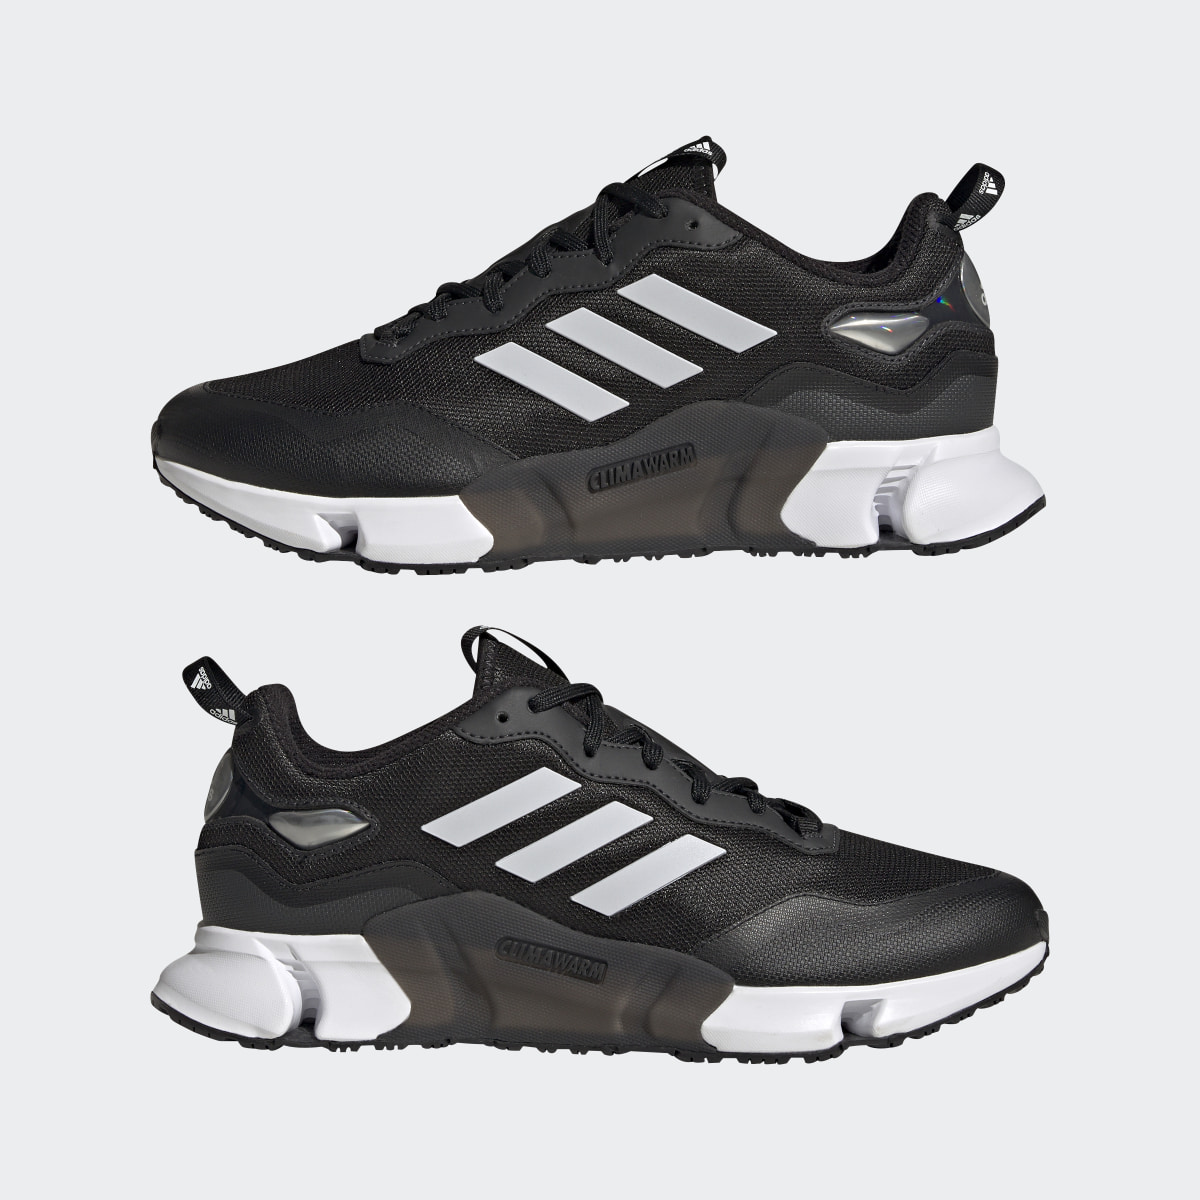 Adidas Climawarm Shoes. 11